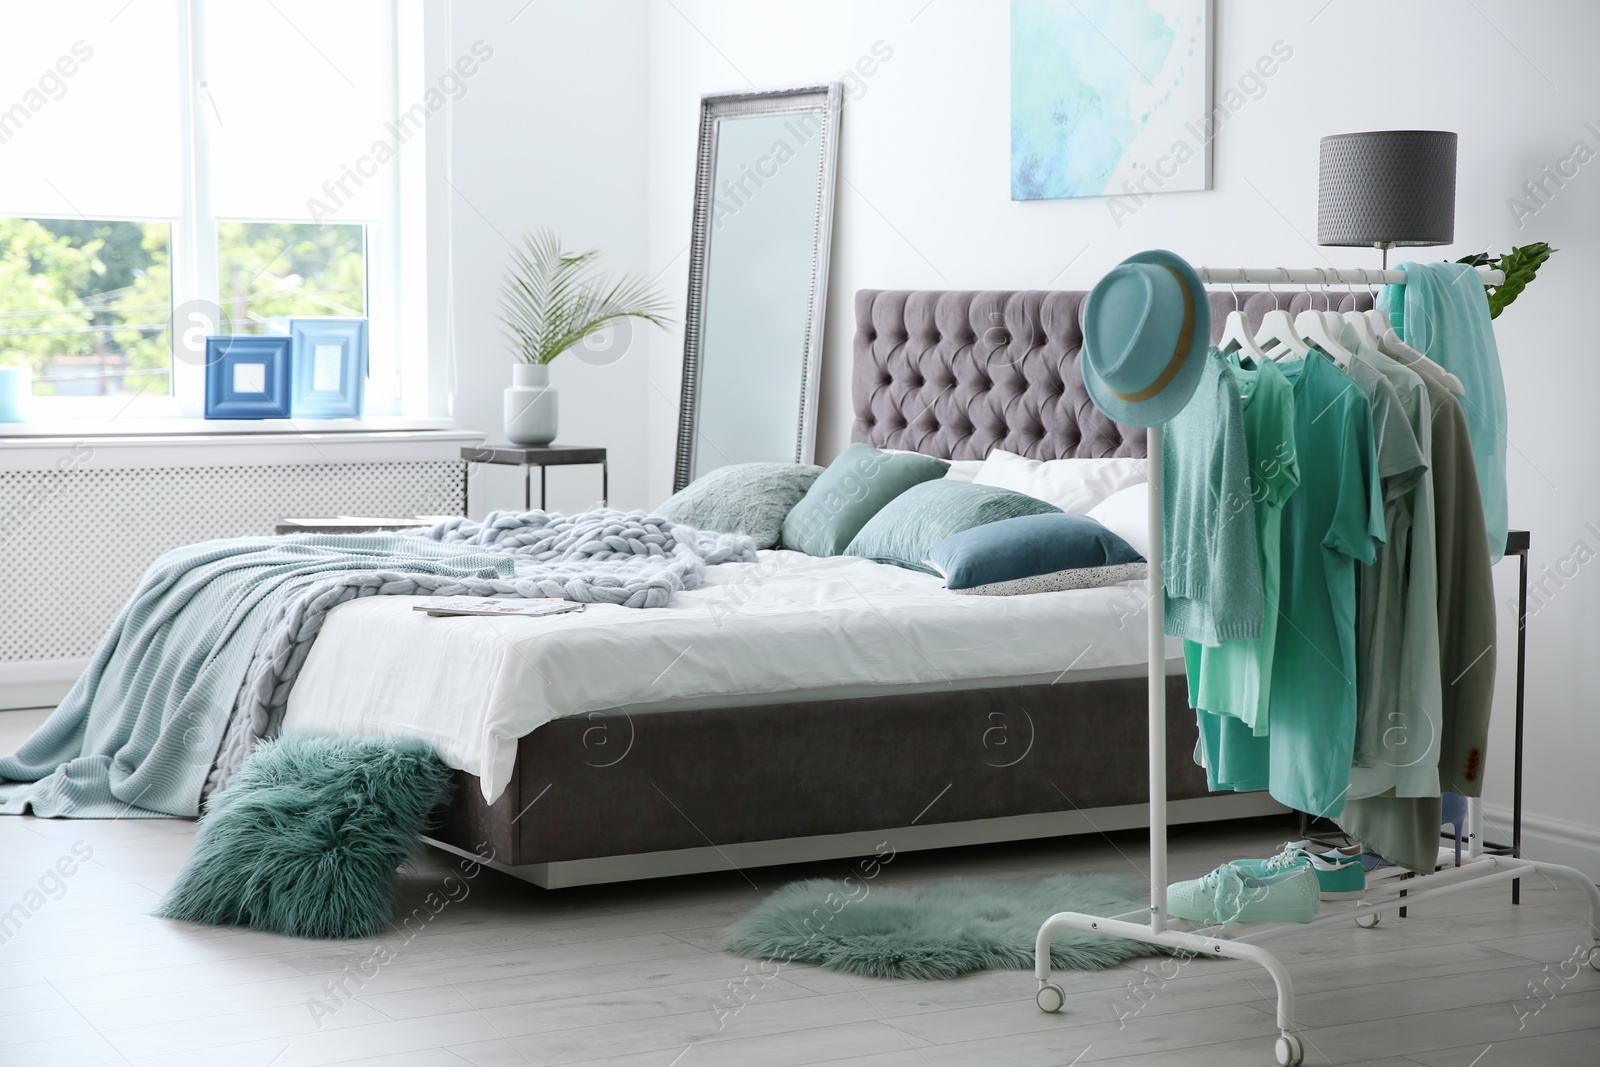 Photo of Stylish bedroom interior with clothes rack and mint decor elements